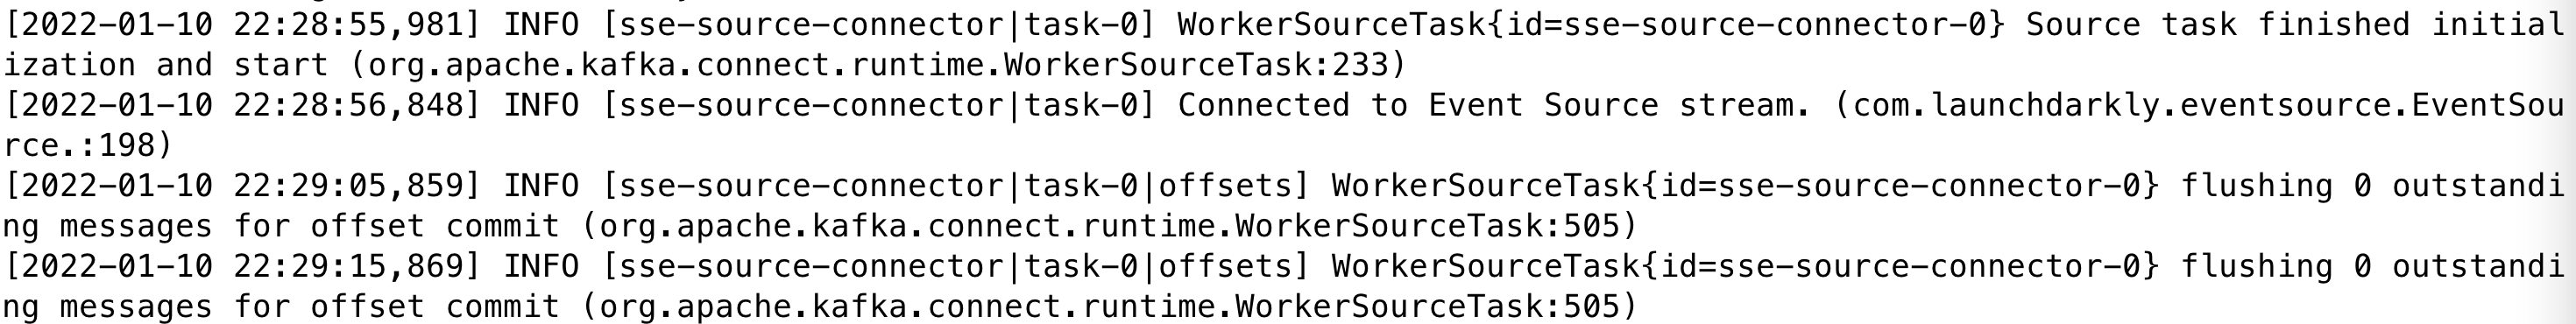 Screenshot showing the process for starting your Kafka Connect Standalone Connector via CLI